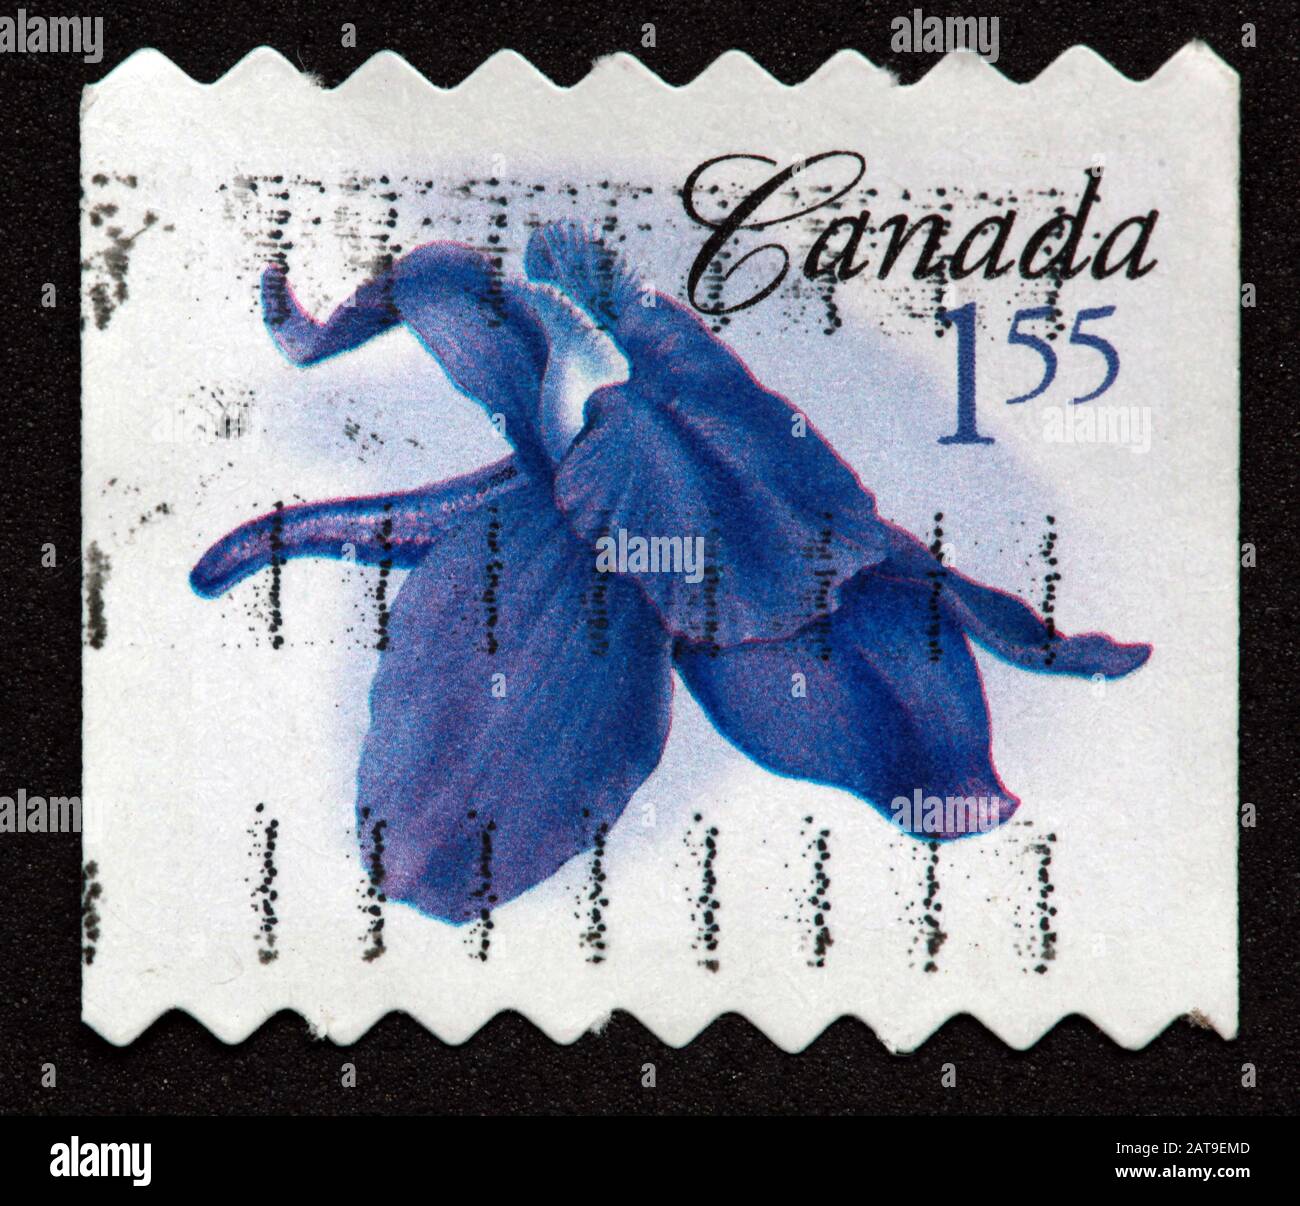 Canadian Stamp, Canada Stamp, Canada Post,used stamp, Little Larkspur, blue Flower, Canada 1.55, $1.55 Stock Photo